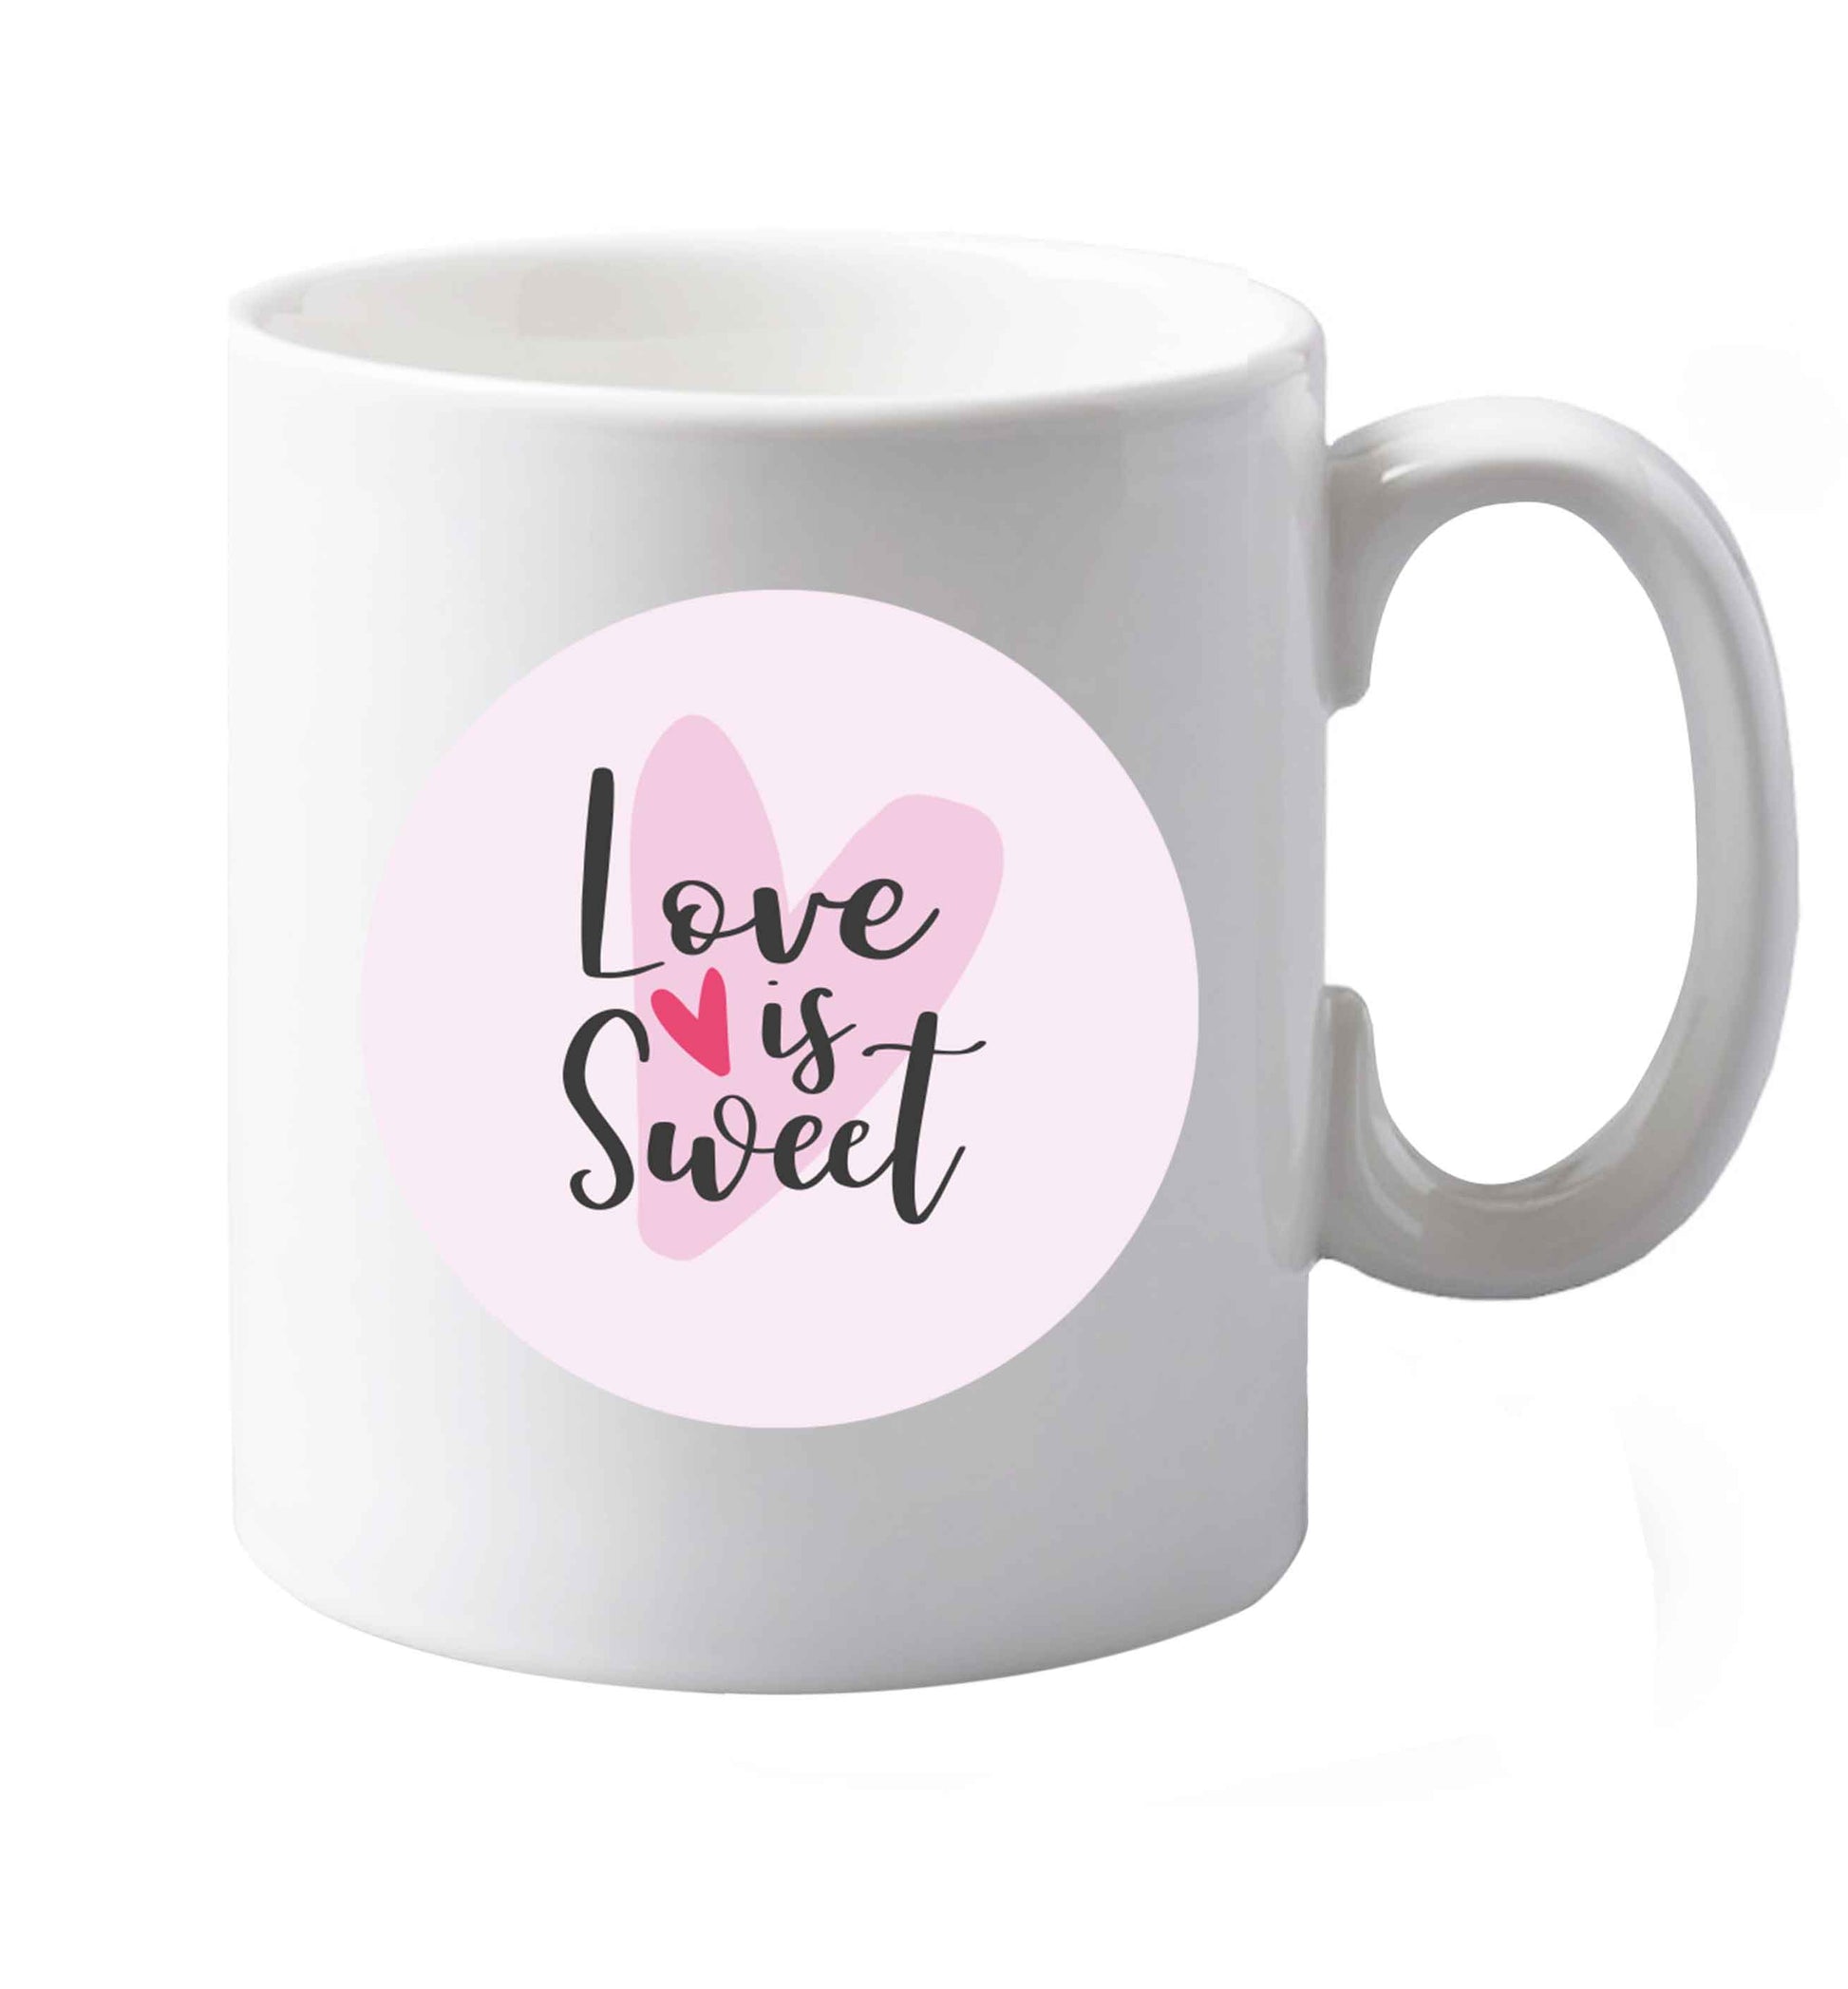 10 oz Love really does make the world go round! Ideal for weddings, valentines or just simply to show someone you love them!    ceramic mug both sides